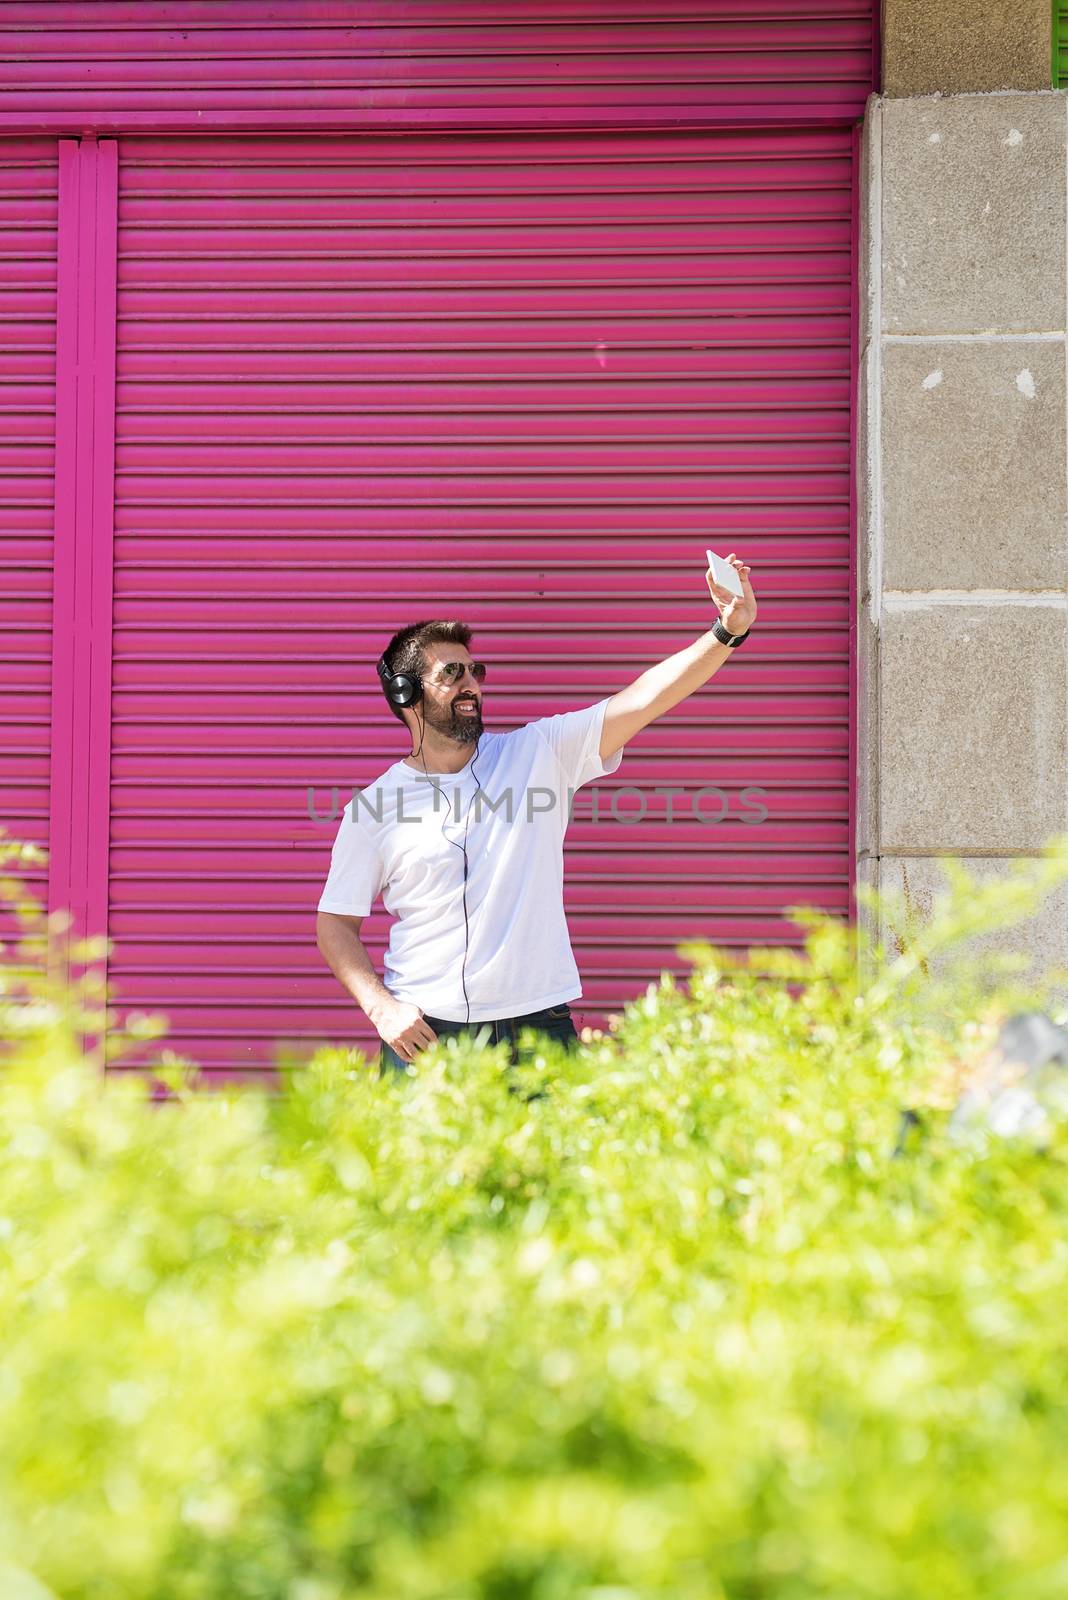 Bearded man with sunglasses taking a selfie against pink wall by raferto1973